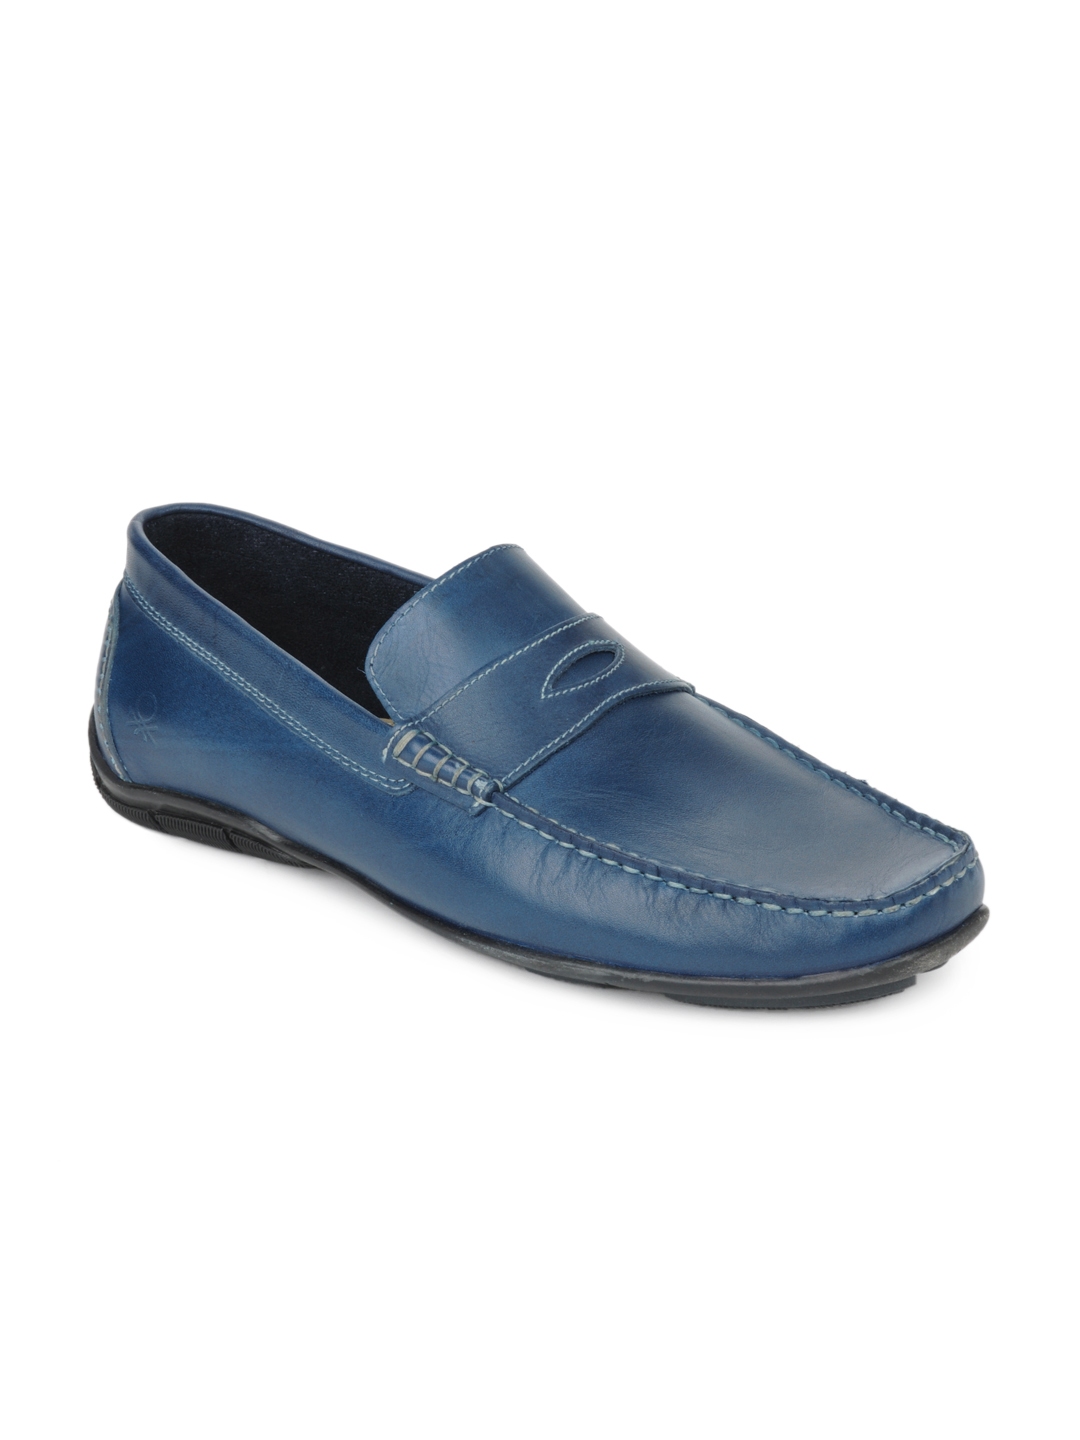 Buy United Colors Of Benetton Men Blue Leather Loafers - Casual Shoes ...